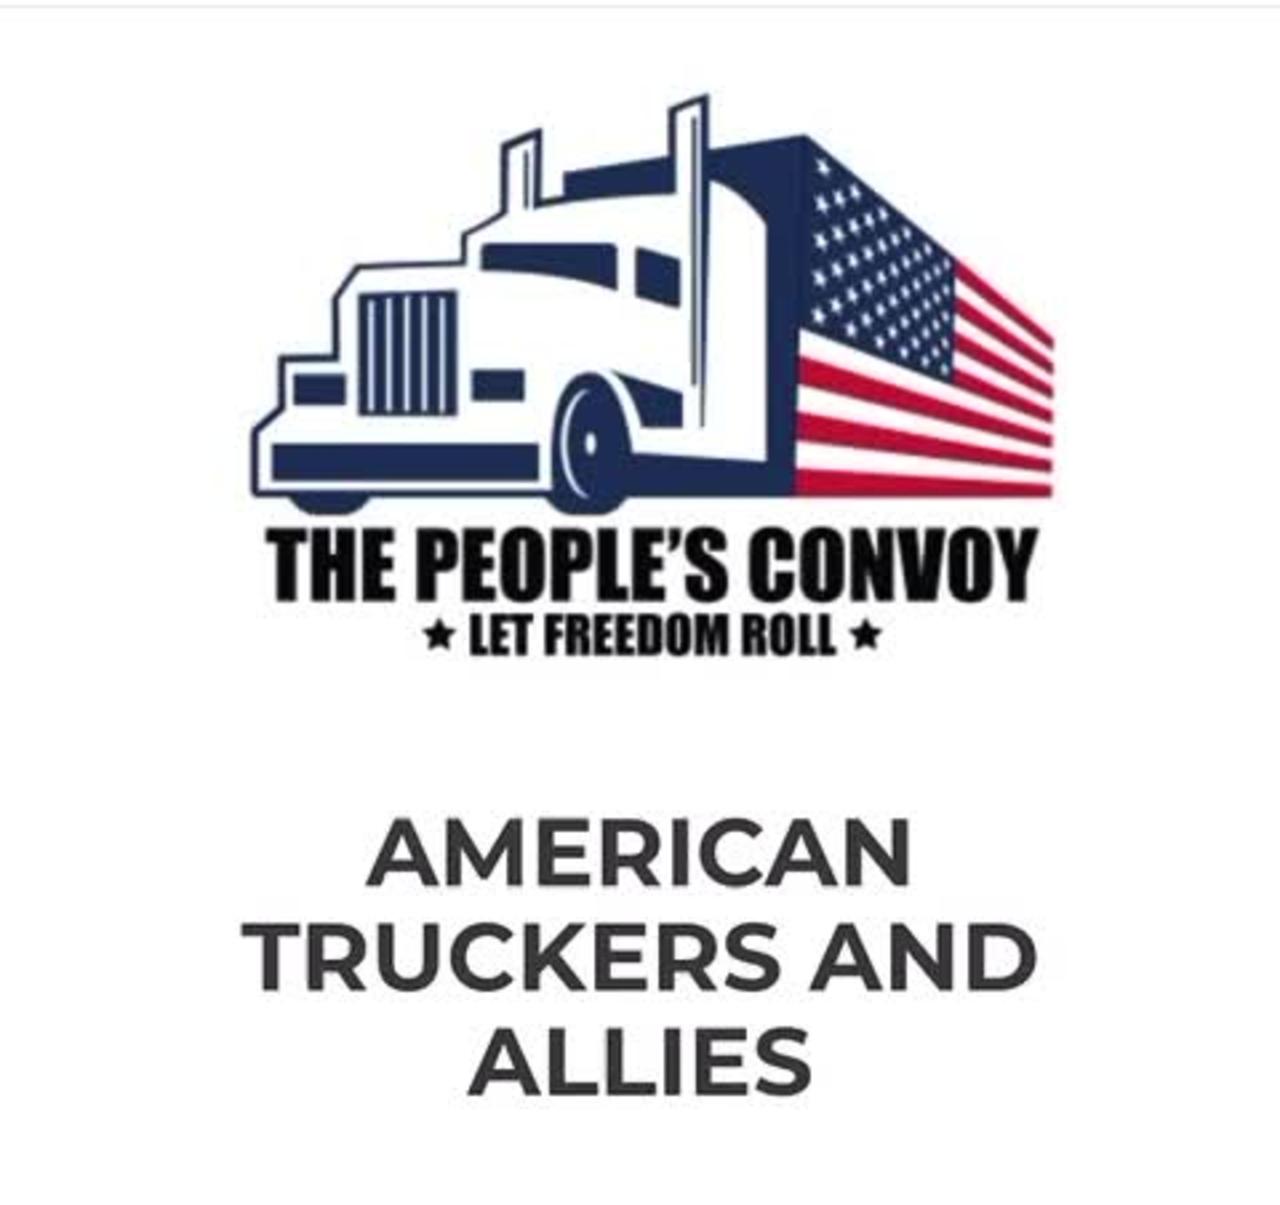 Live - The Peoples Convoy - Pulling into Hardin Montana